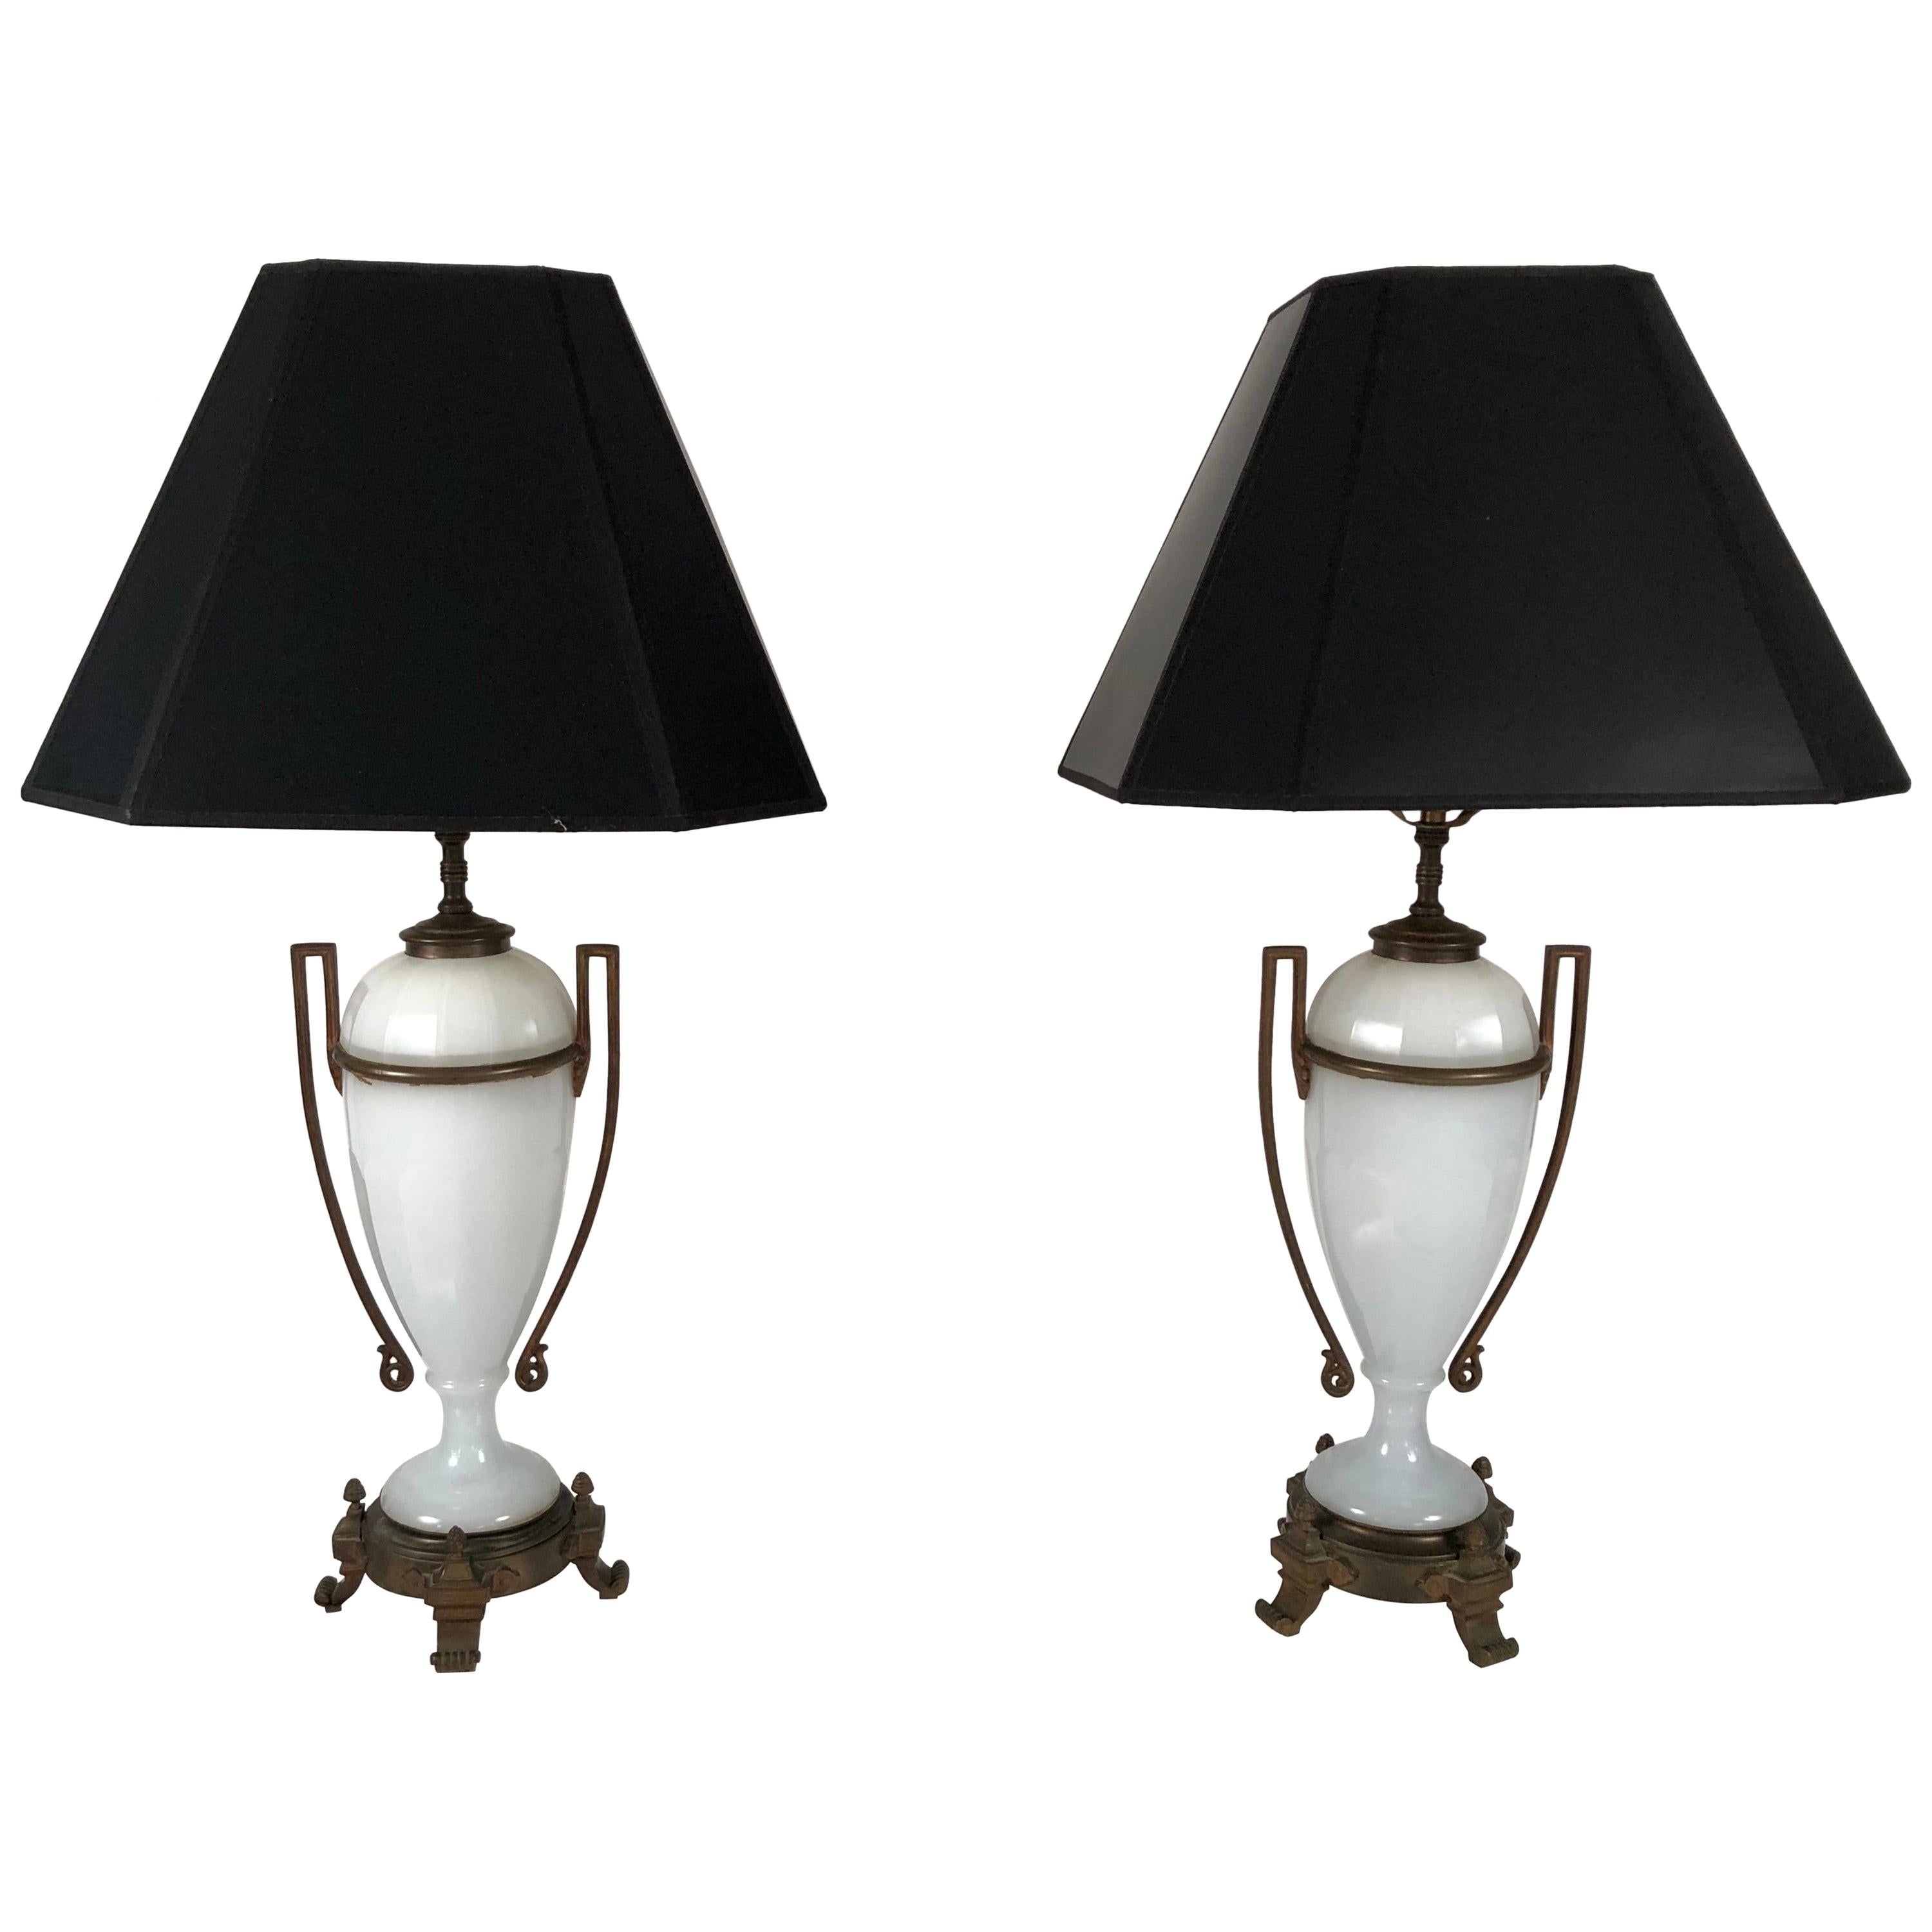 Pair of Louis XVI Style Neoclassical White Opaline Glass and Ormolu Lamps